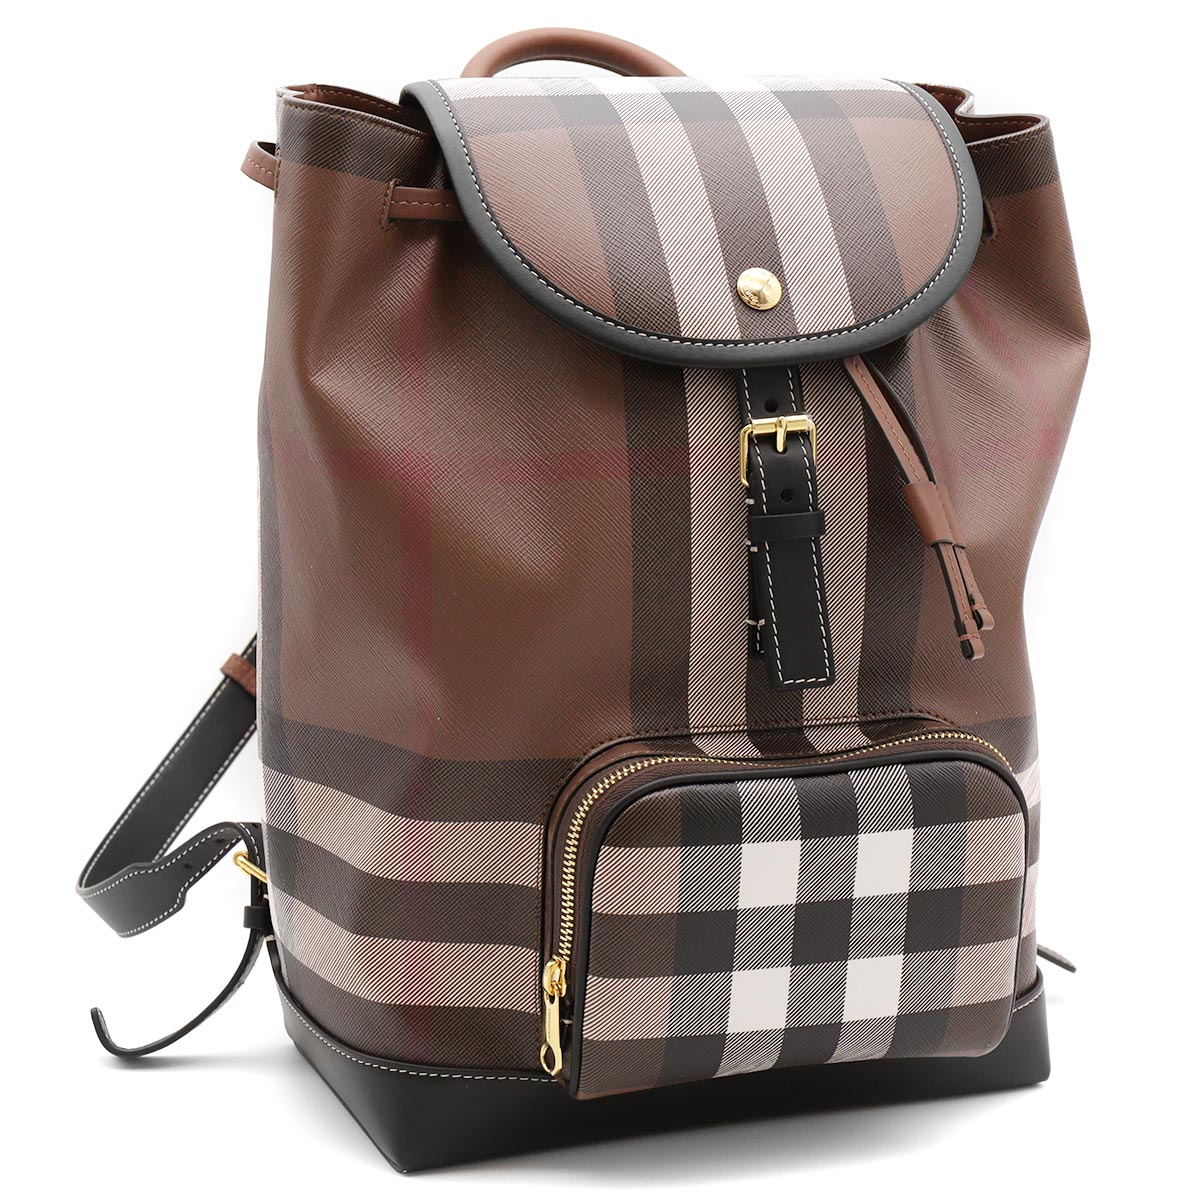 o[o[ bNTbN/obNpbN obO Y fB[X WCAg`FbN _[No[`uE&ubN LL MD BACKPACK GC9 143873 A8900 8069664 BURBERRY